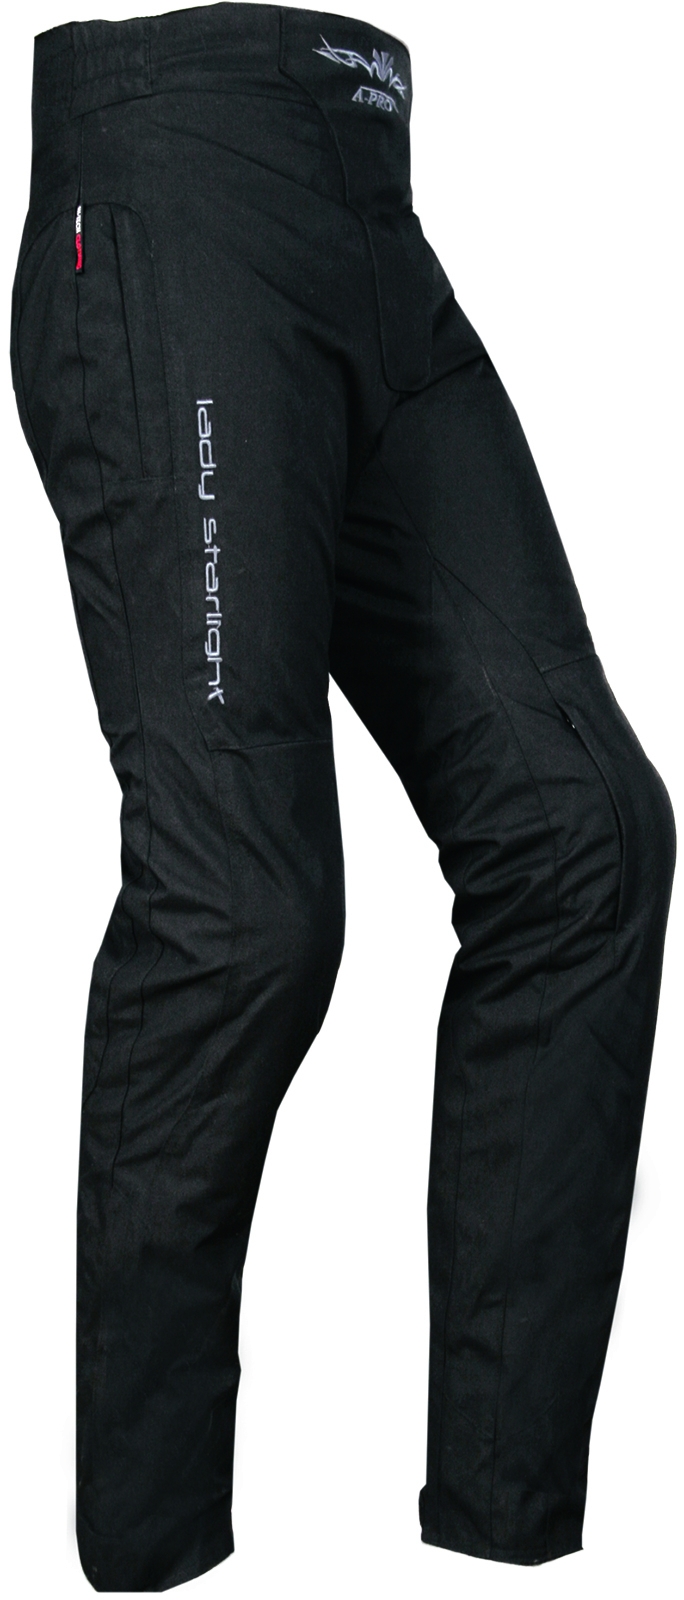 OnTour Motorcycle CE Armour Waterproof Textile Lined Trousers SALE OFFER 